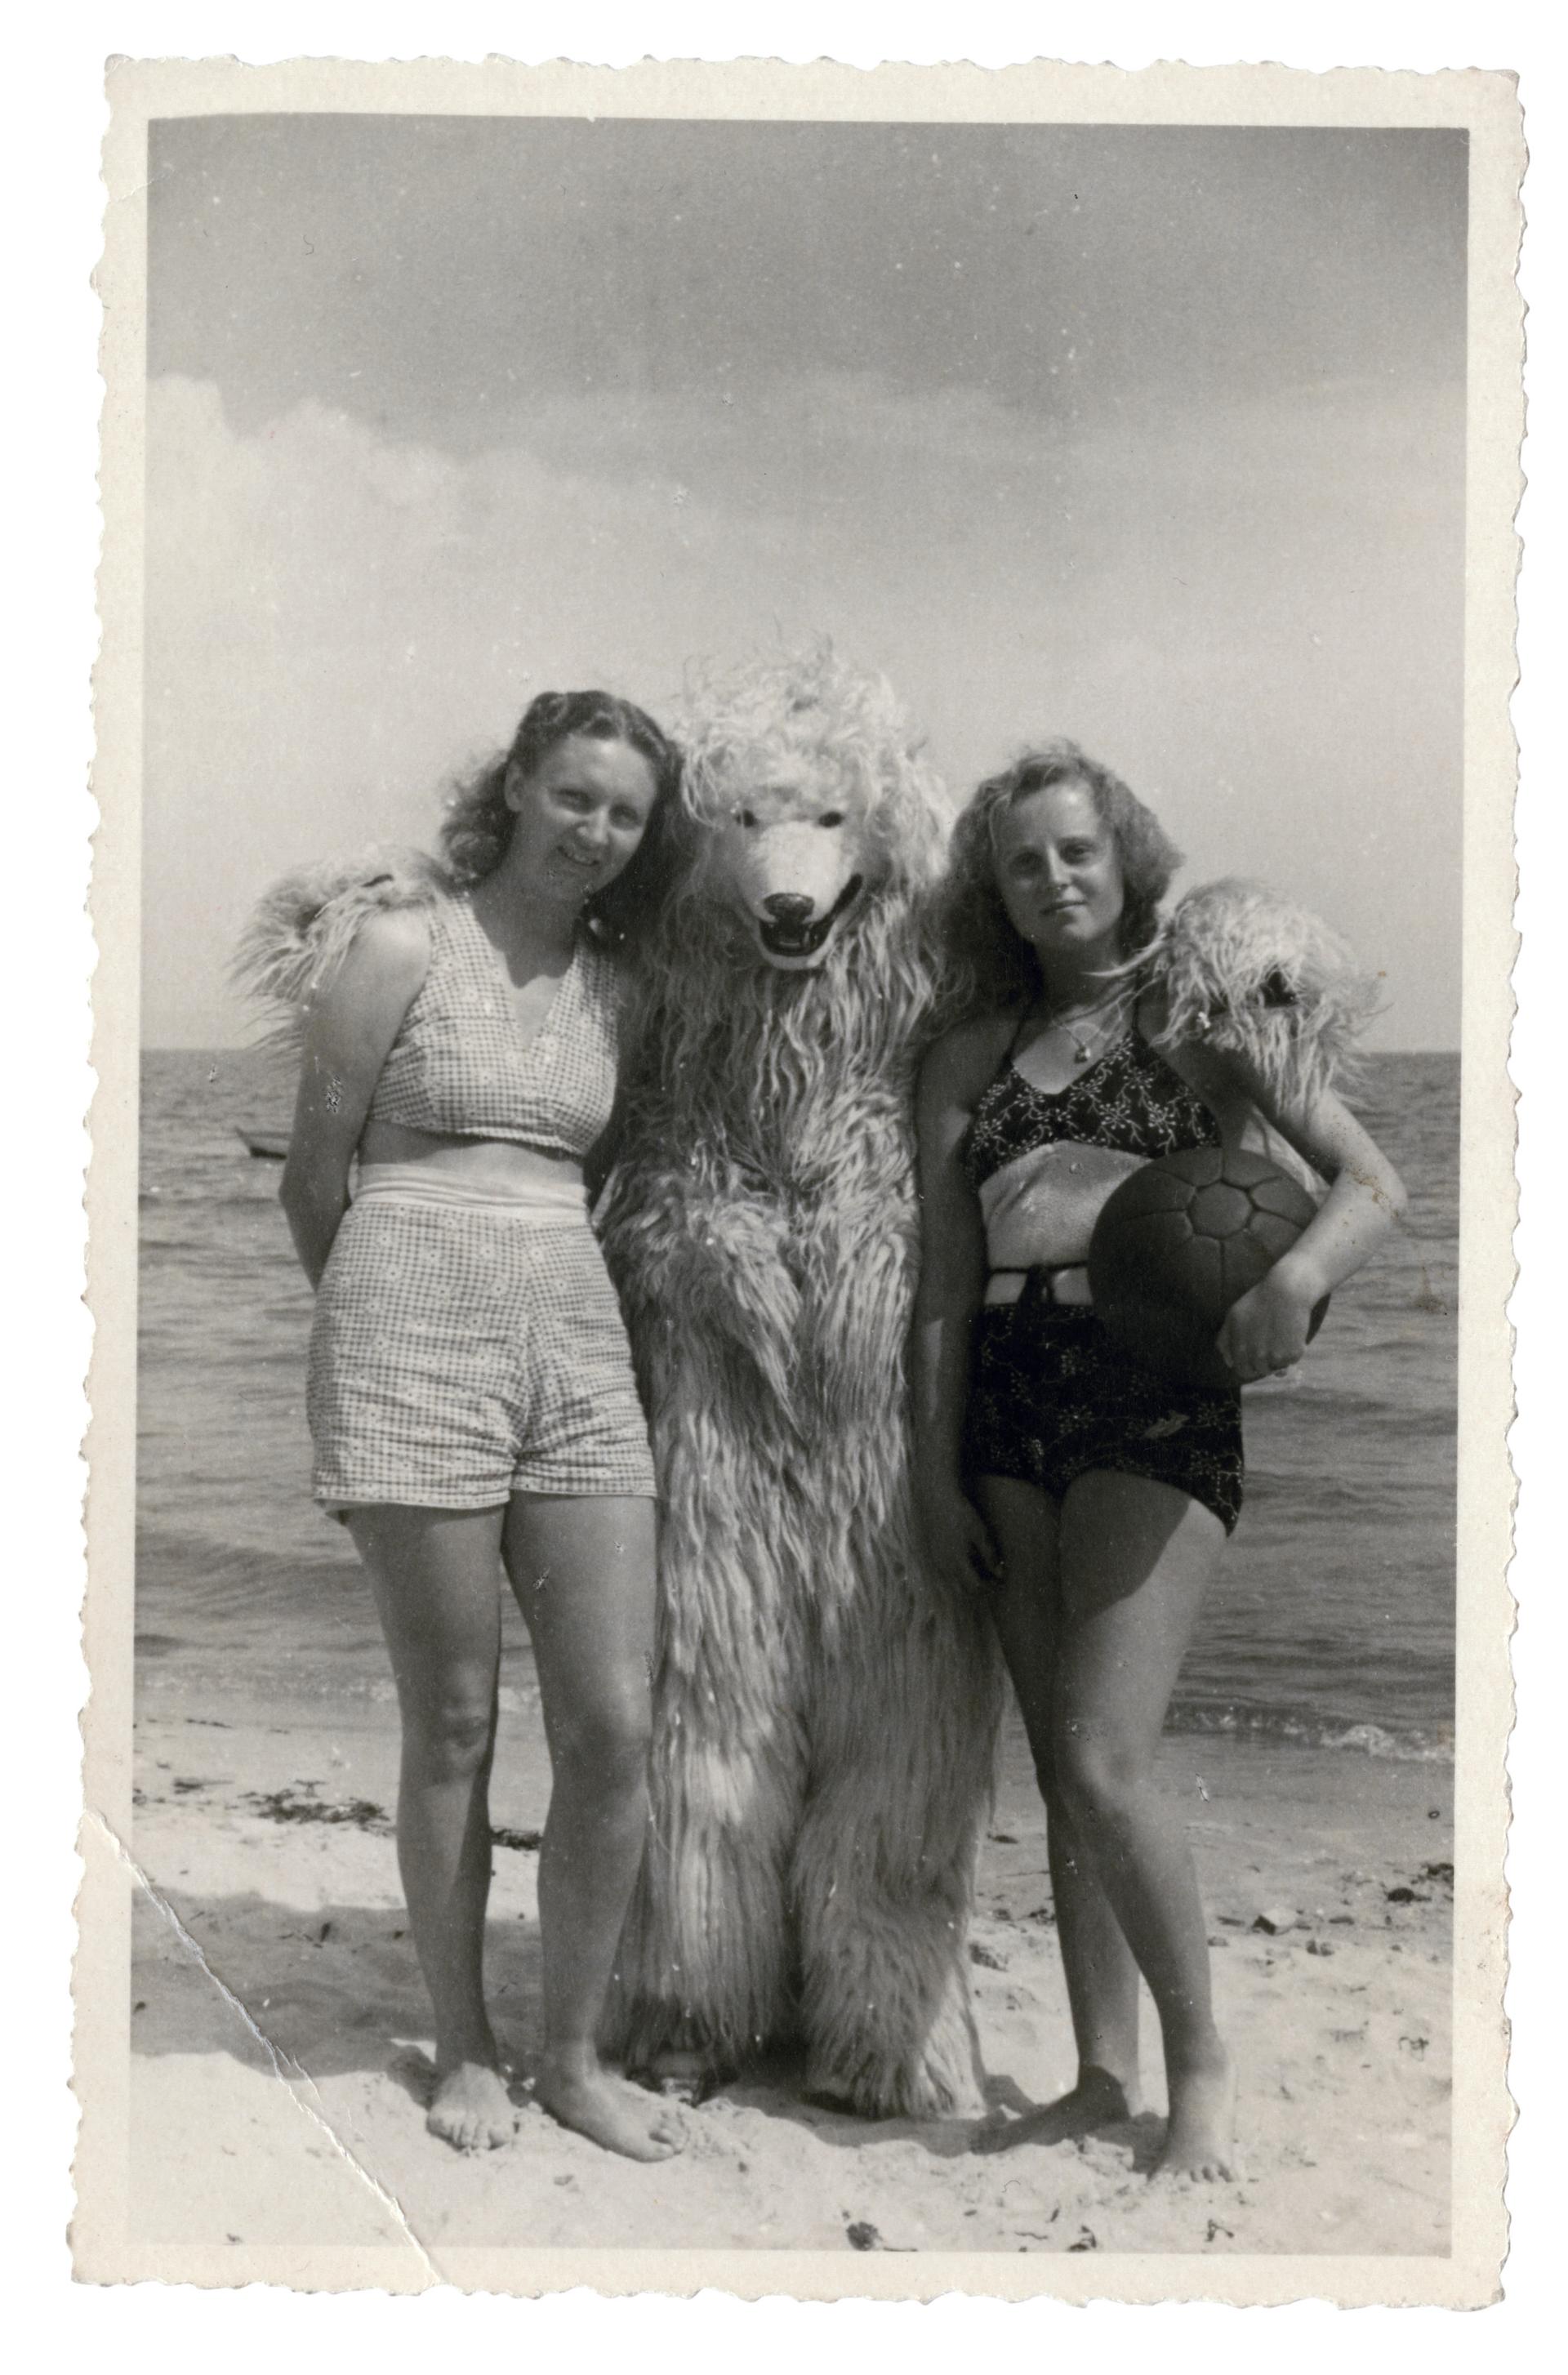 A polar bear on the beach with his arms around two bathing beauties.